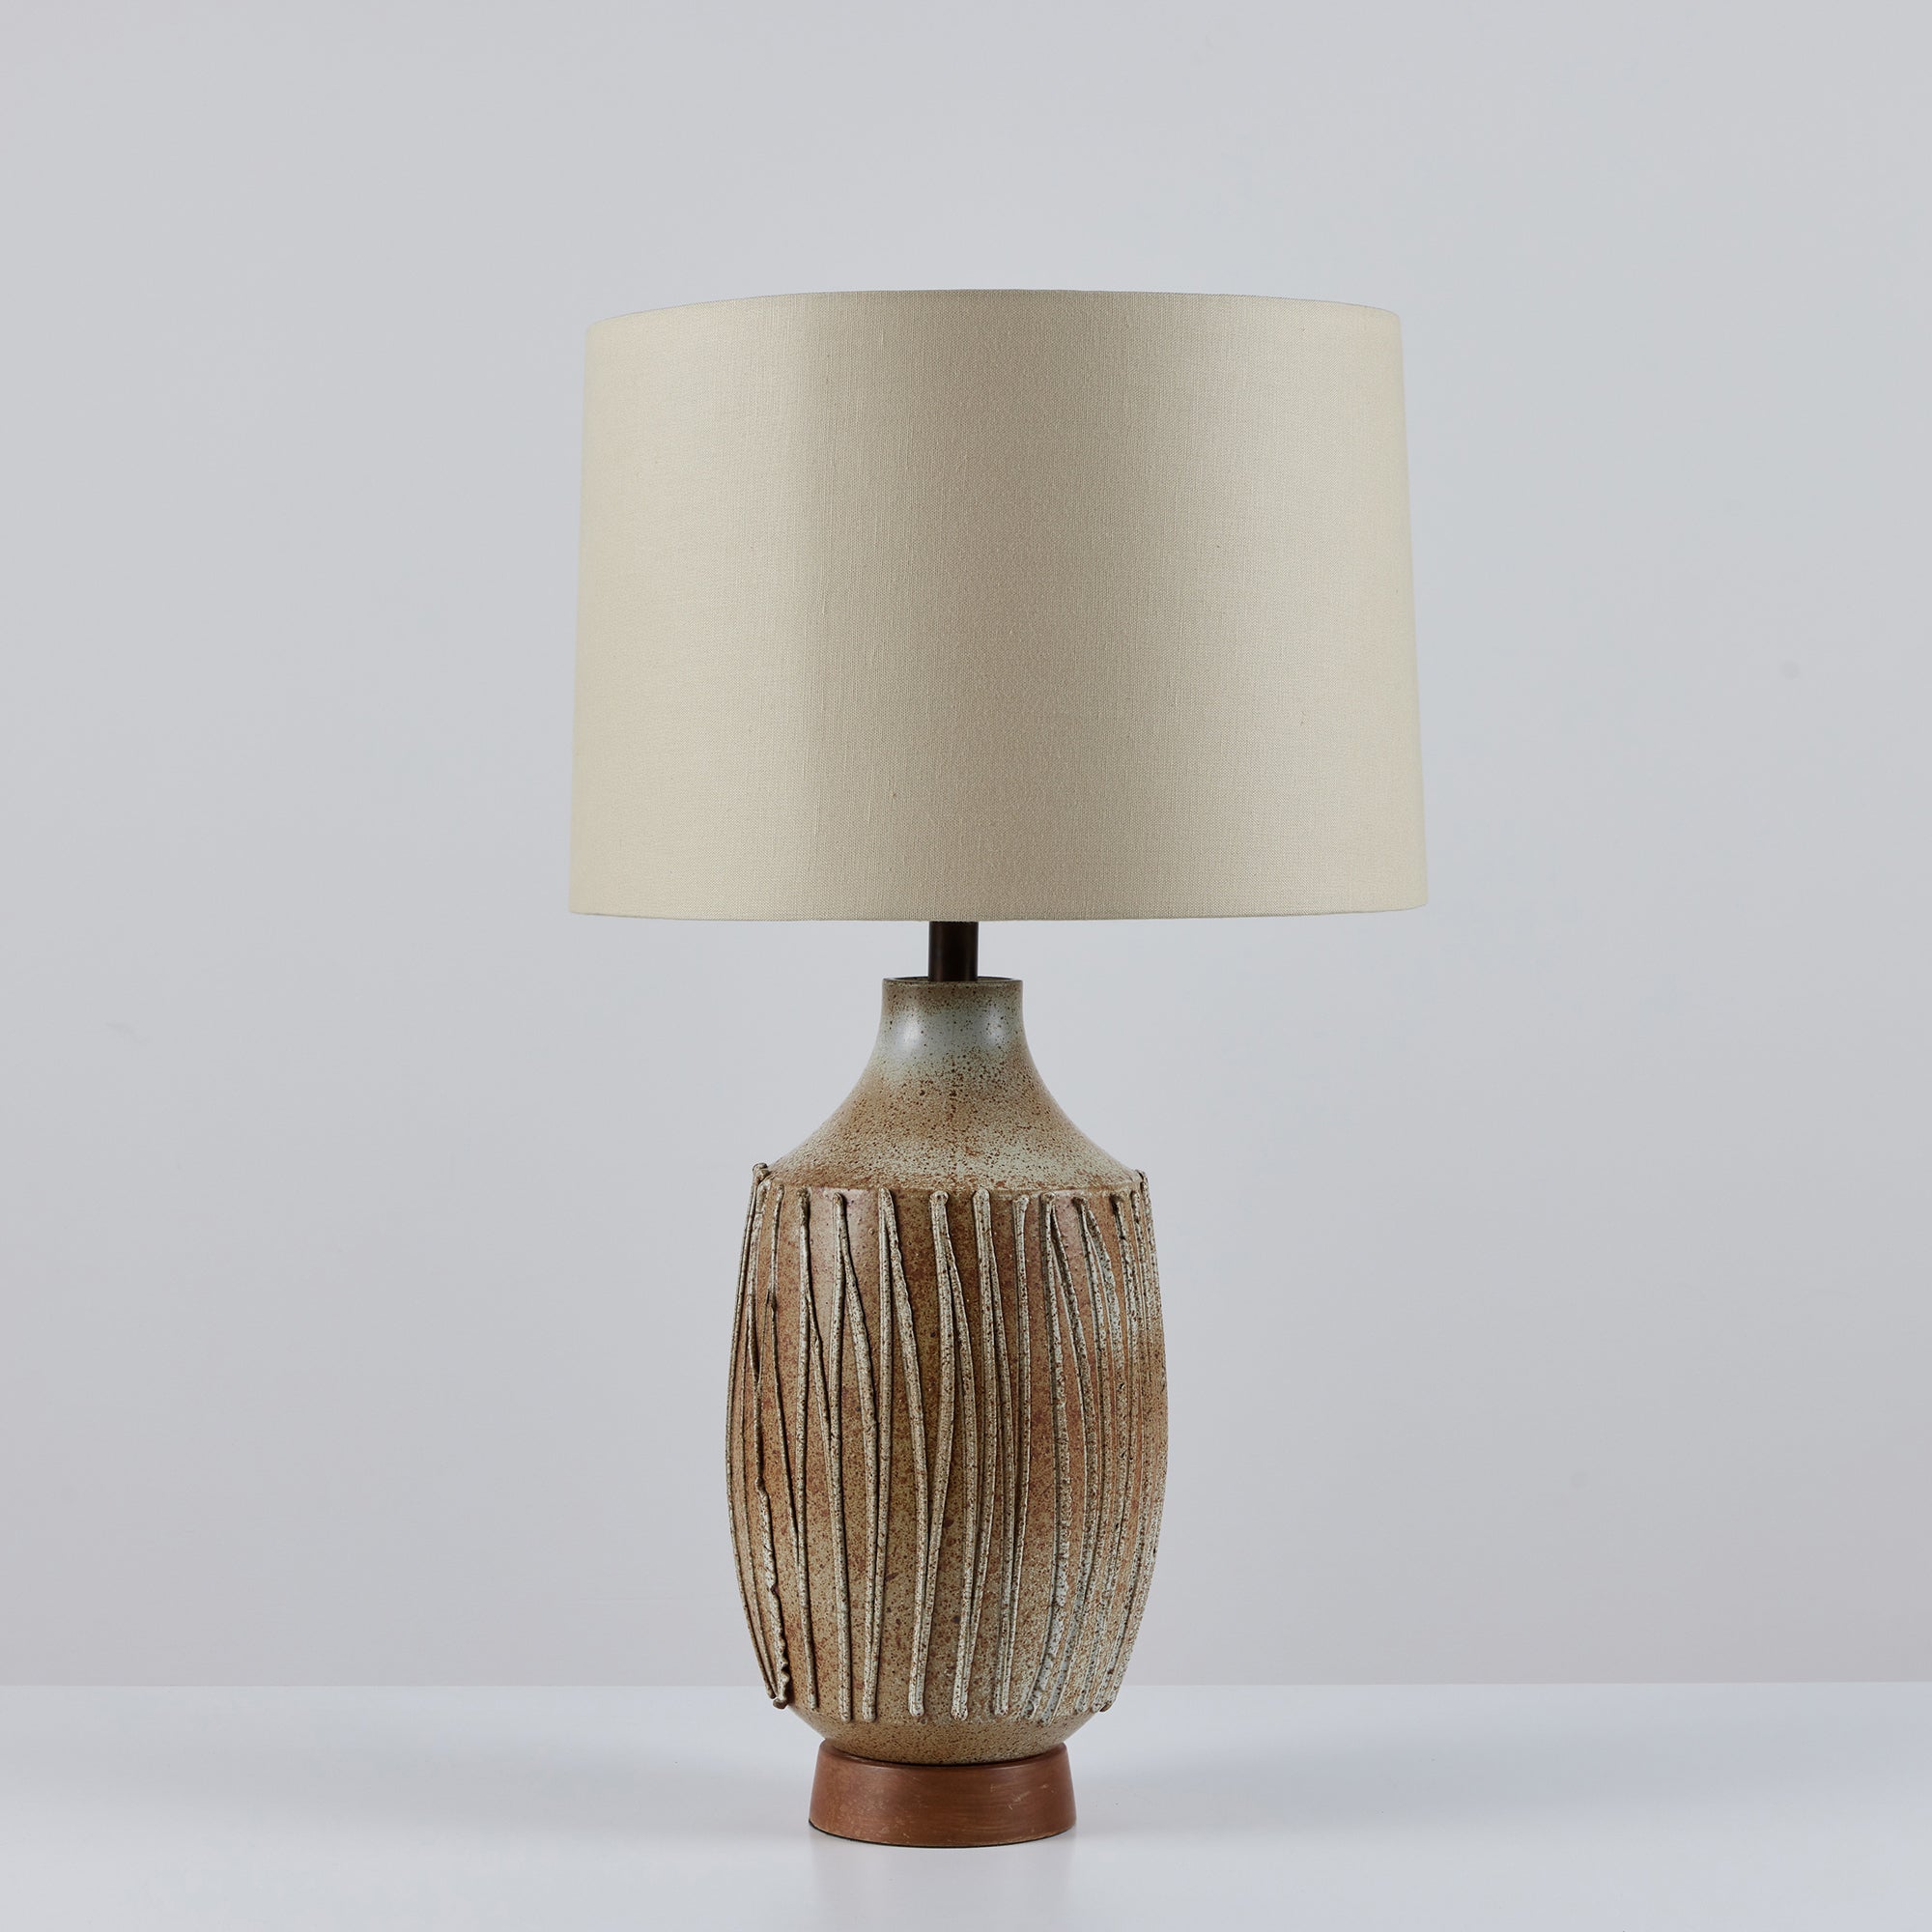 David Cressey Textured Stoneware Lamp for Architectural Pottery